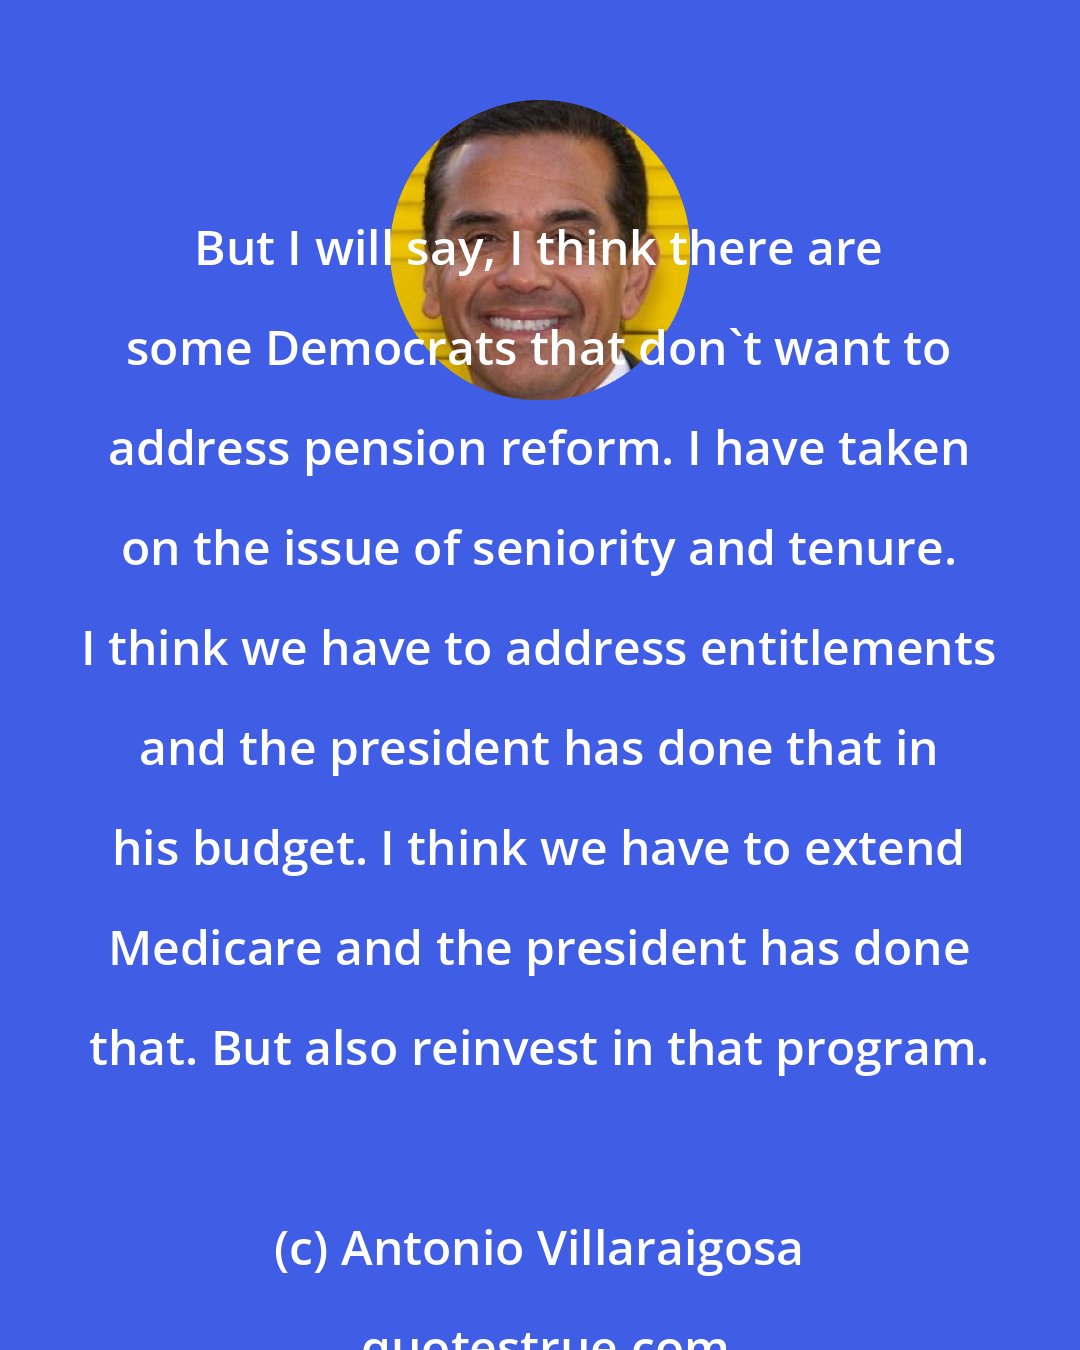 Antonio Villaraigosa: But I will say, I think there are some Democrats that don't want to address pension reform. I have taken on the issue of seniority and tenure. I think we have to address entitlements and the president has done that in his budget. I think we have to extend Medicare and the president has done that. But also reinvest in that program.